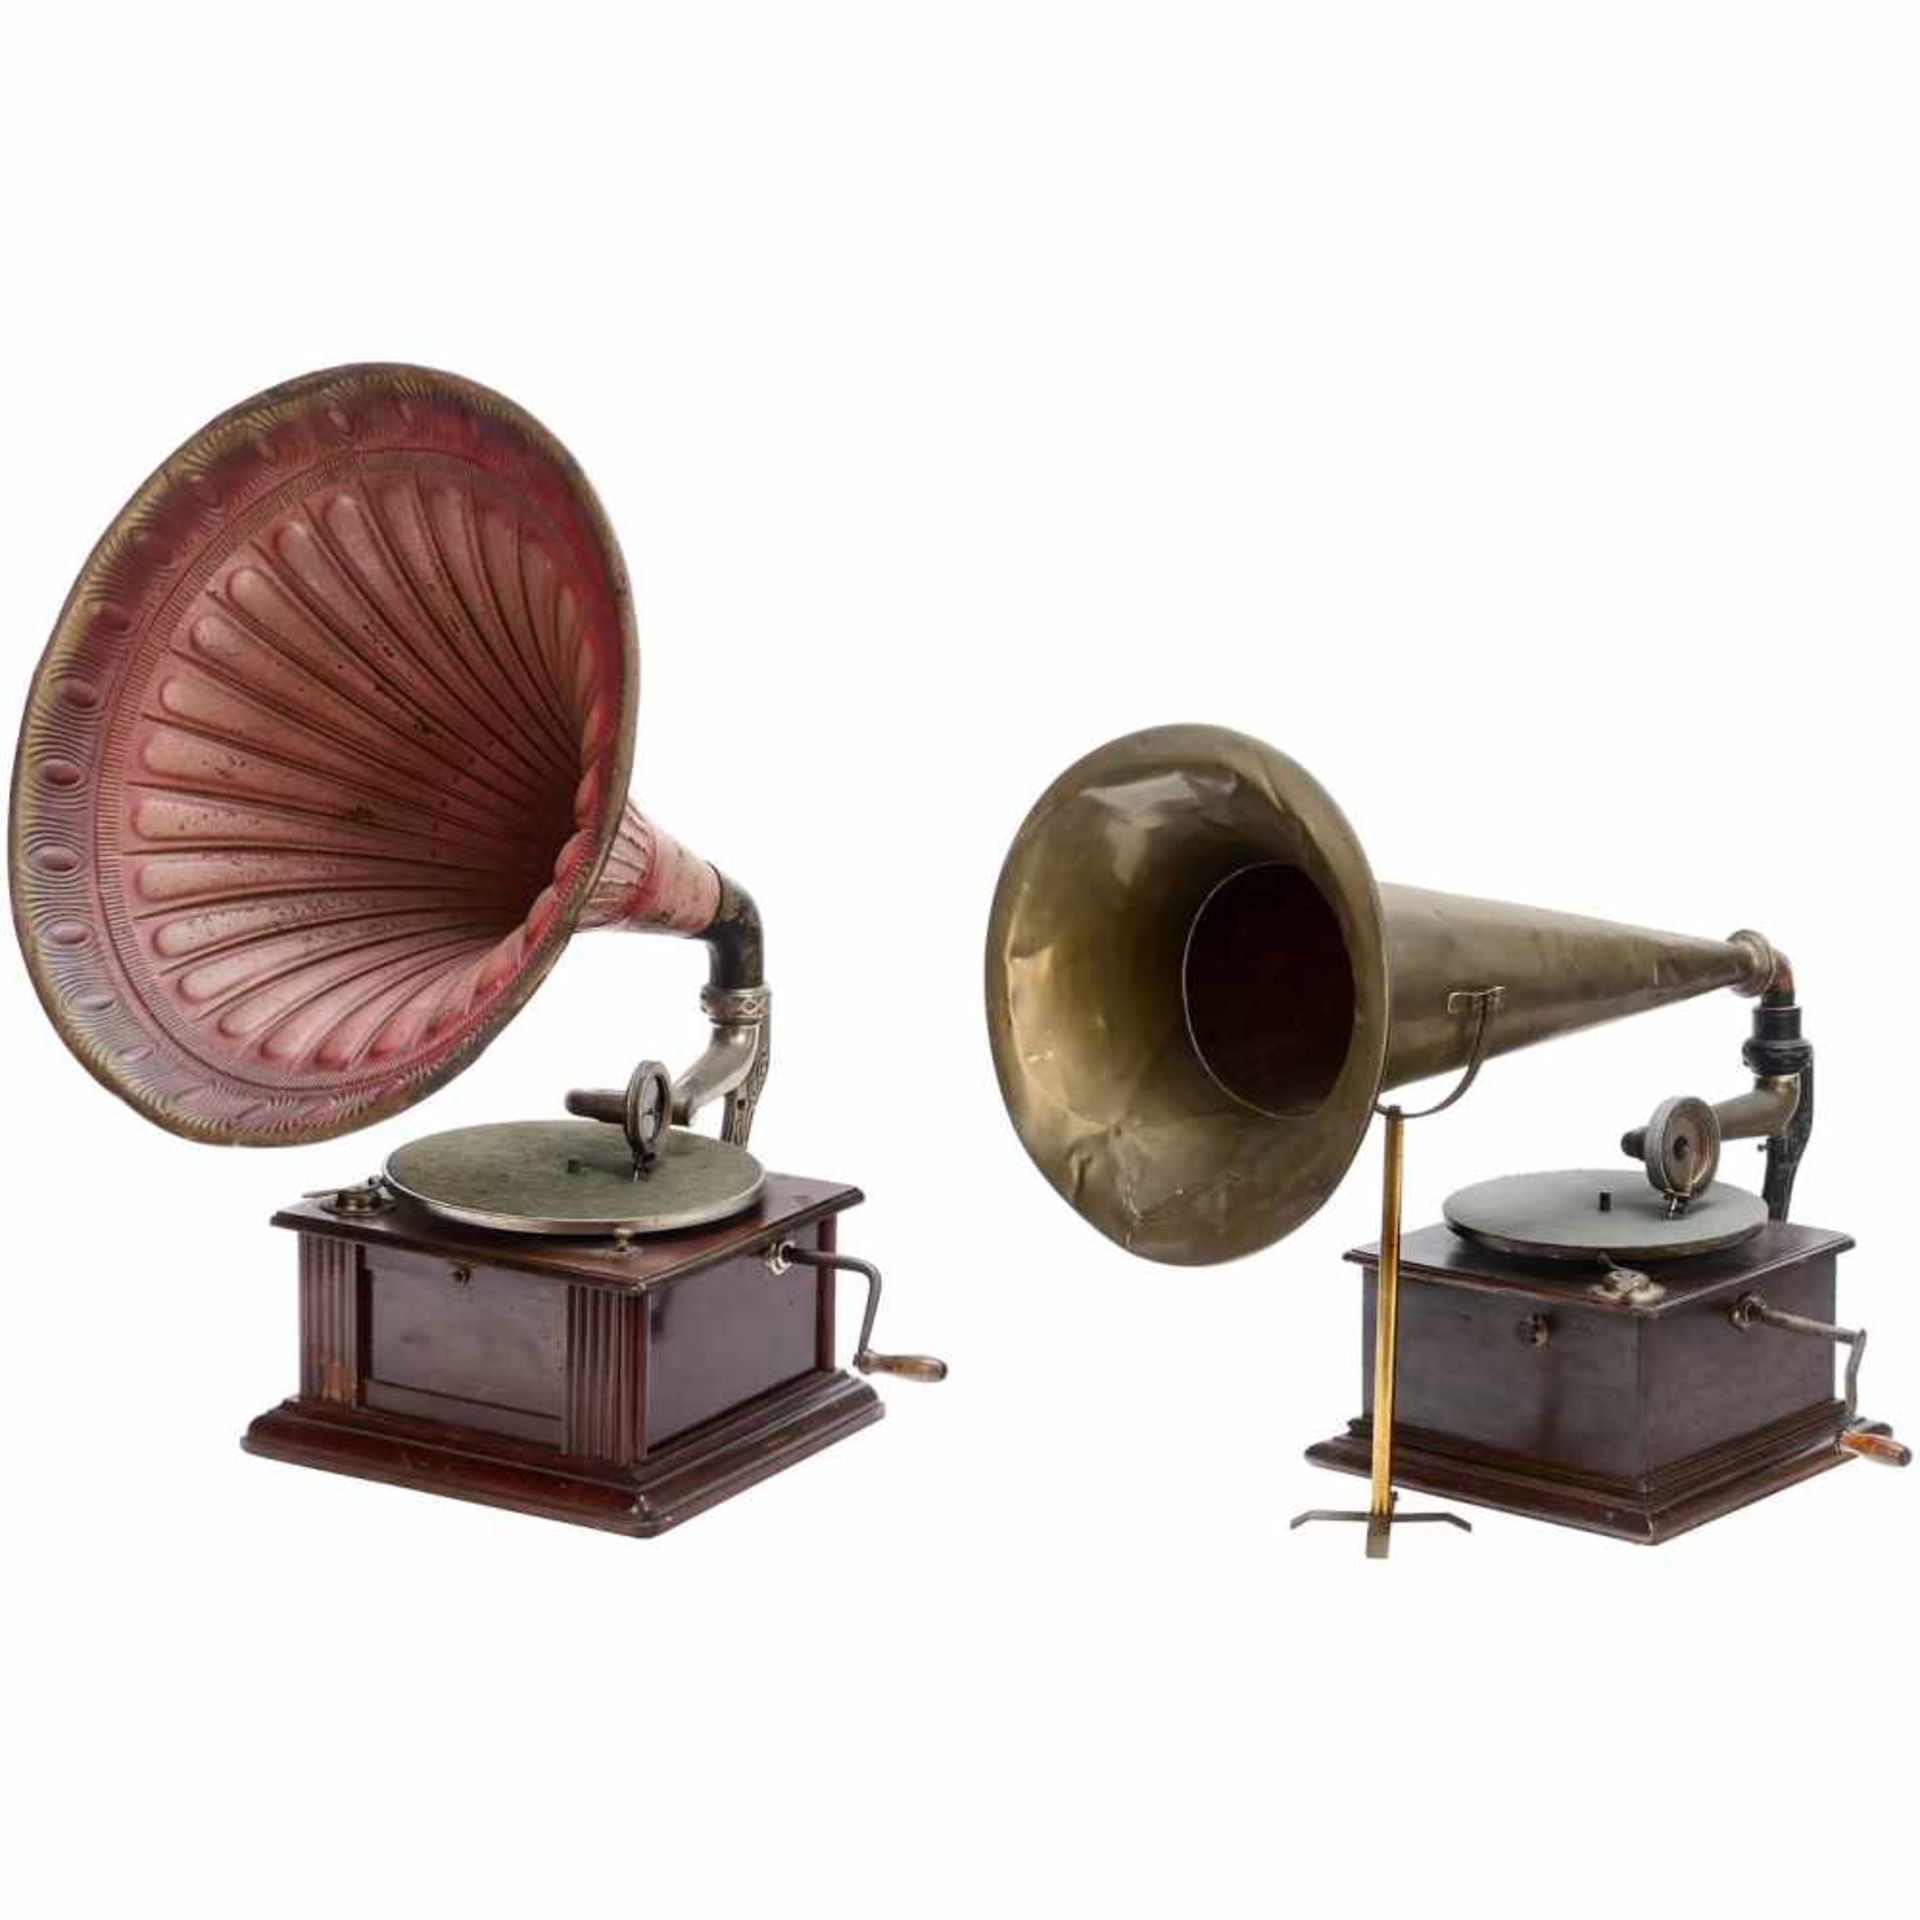 2 Horn Gramophones, c. 19151) Unmarked, wood case, spring-driven, mica reproducer, brass horn,